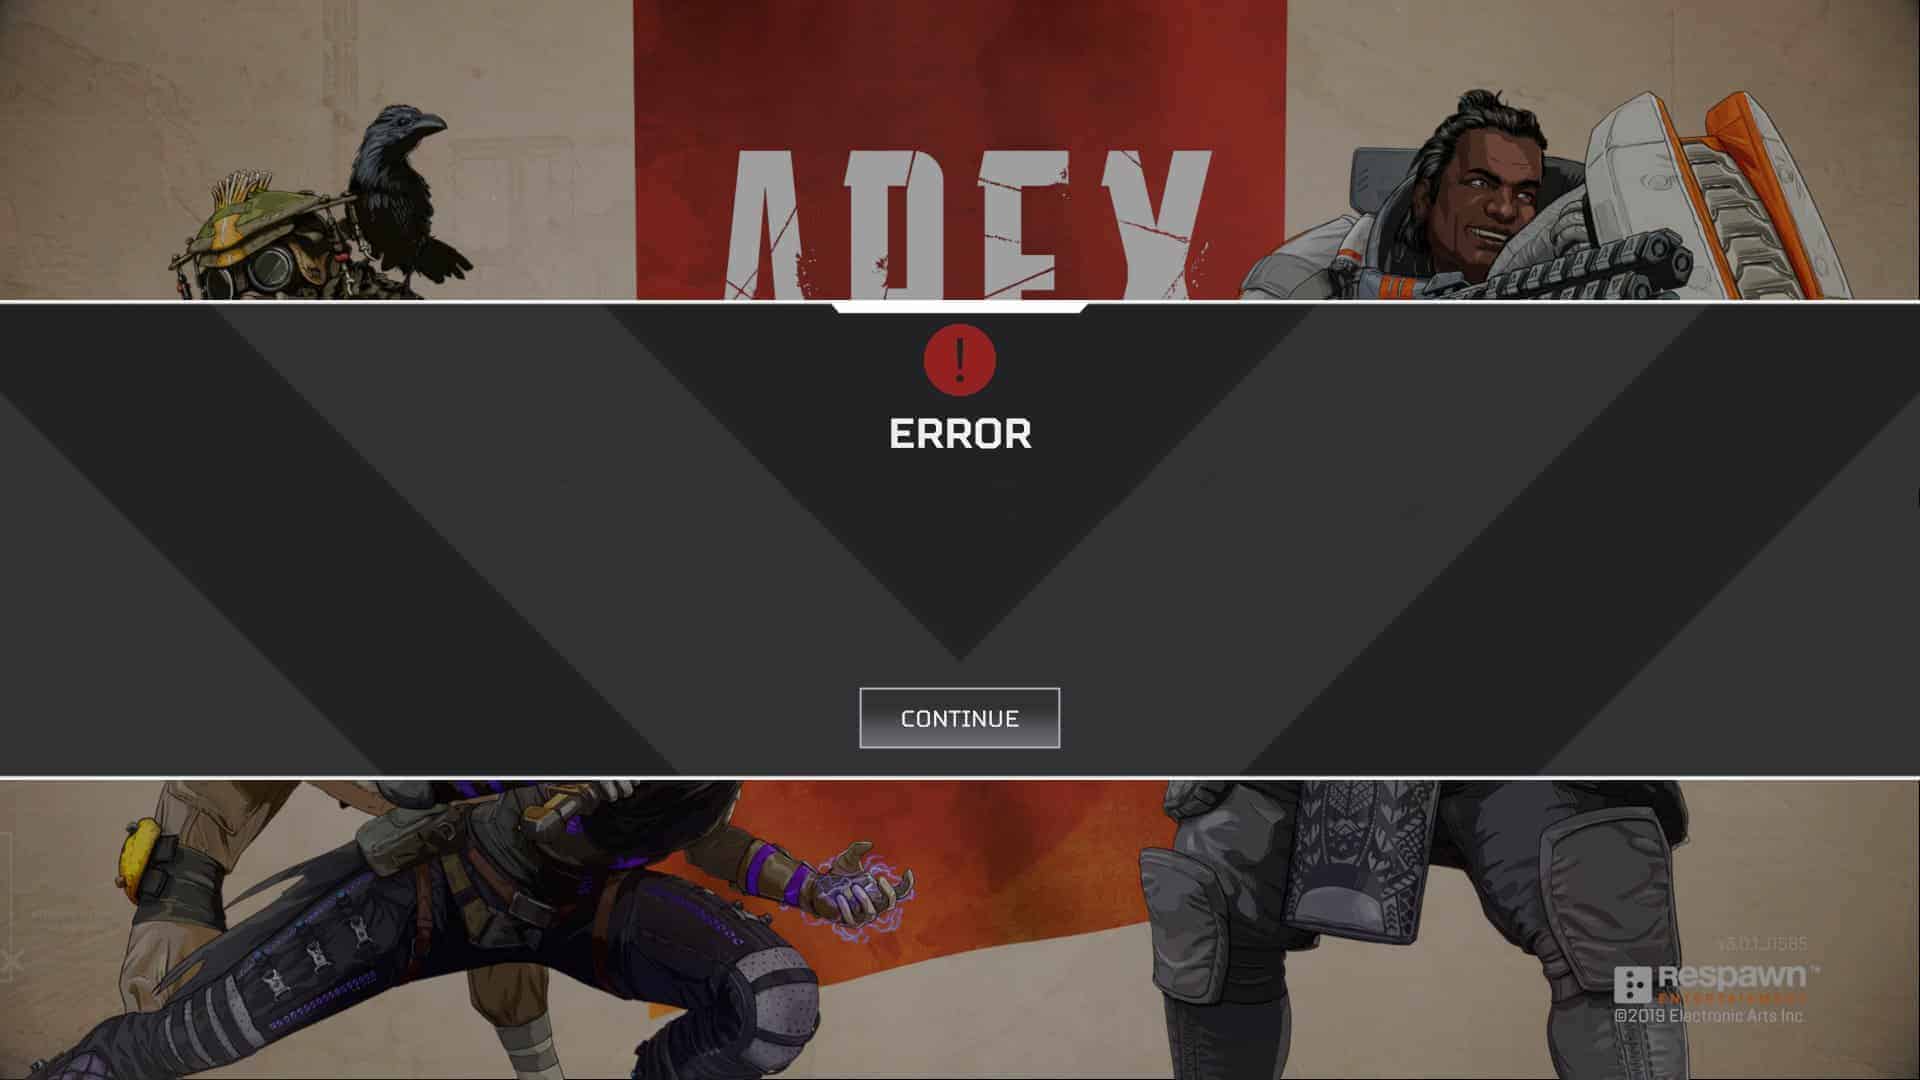 How To Fix Apex Legends Crashing Issues On Pc Ps4 And Xbox One All Things How